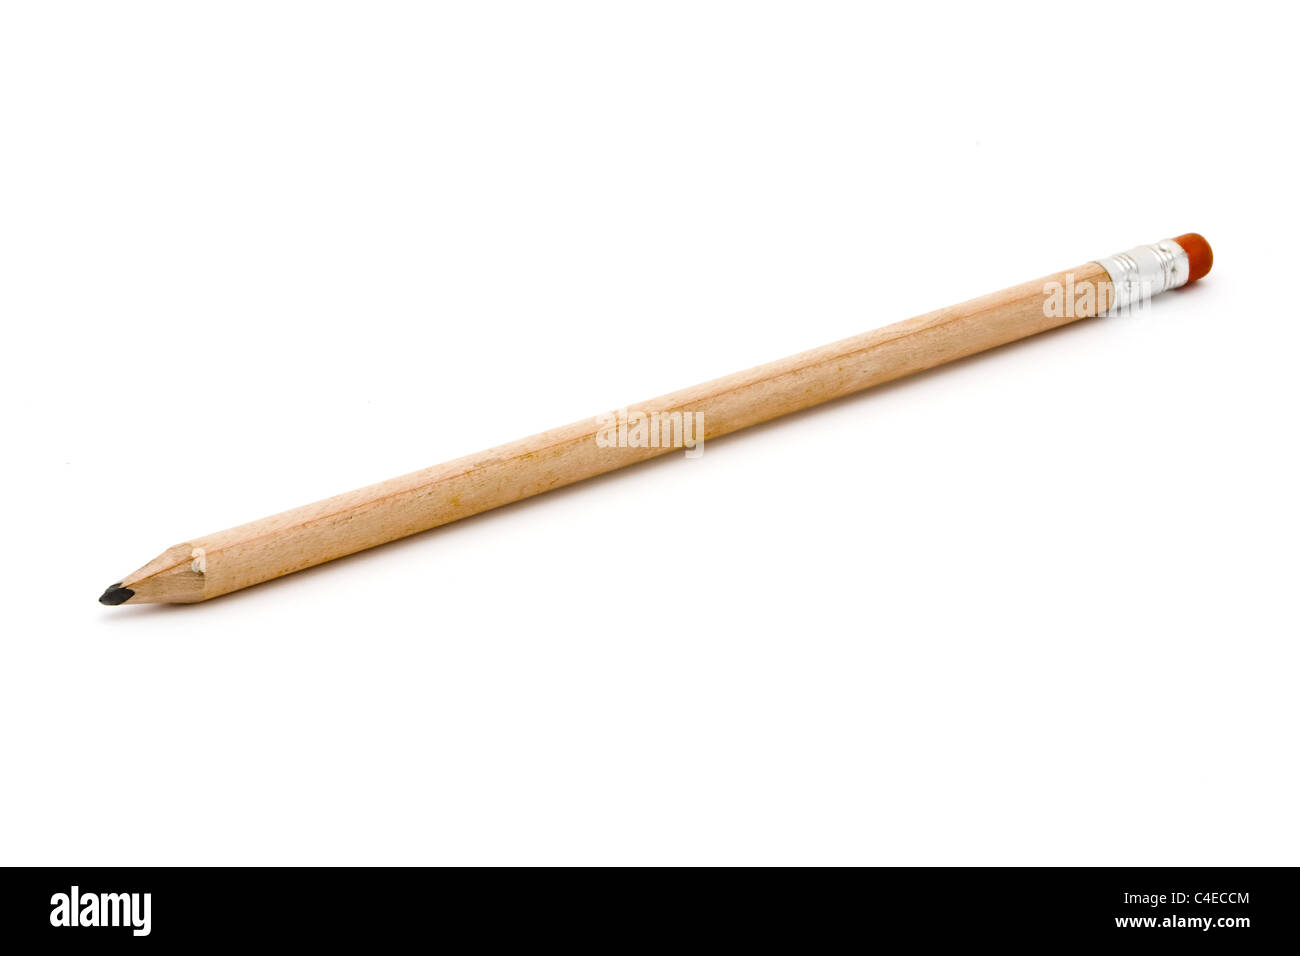 Single wooden pencil on a white background Stock Photo